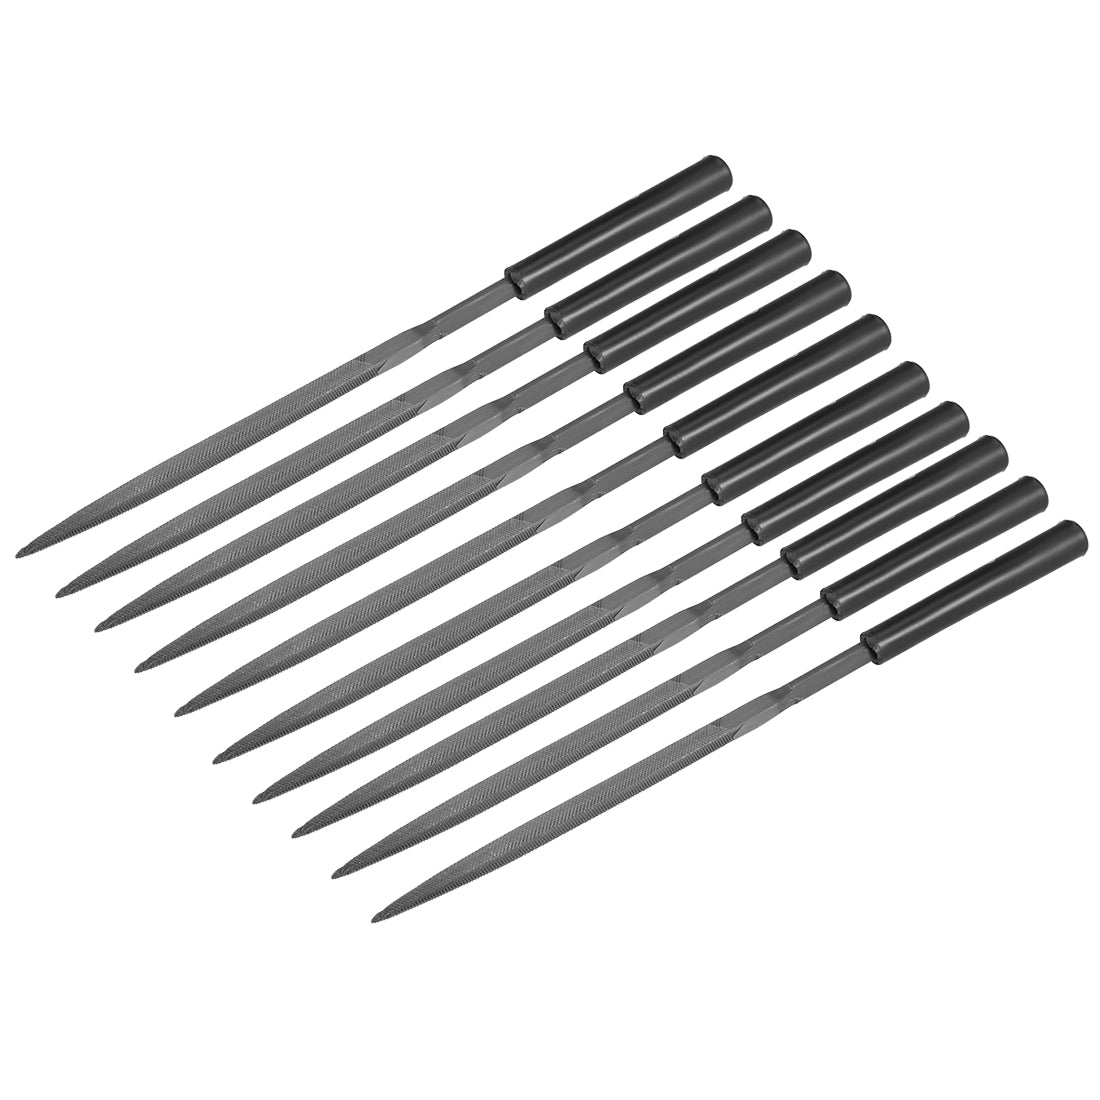 uxcell Uxcell 10Pcs Second Cut Steel Triangular Needle File with Plastic Handle, 5mm x 180mm